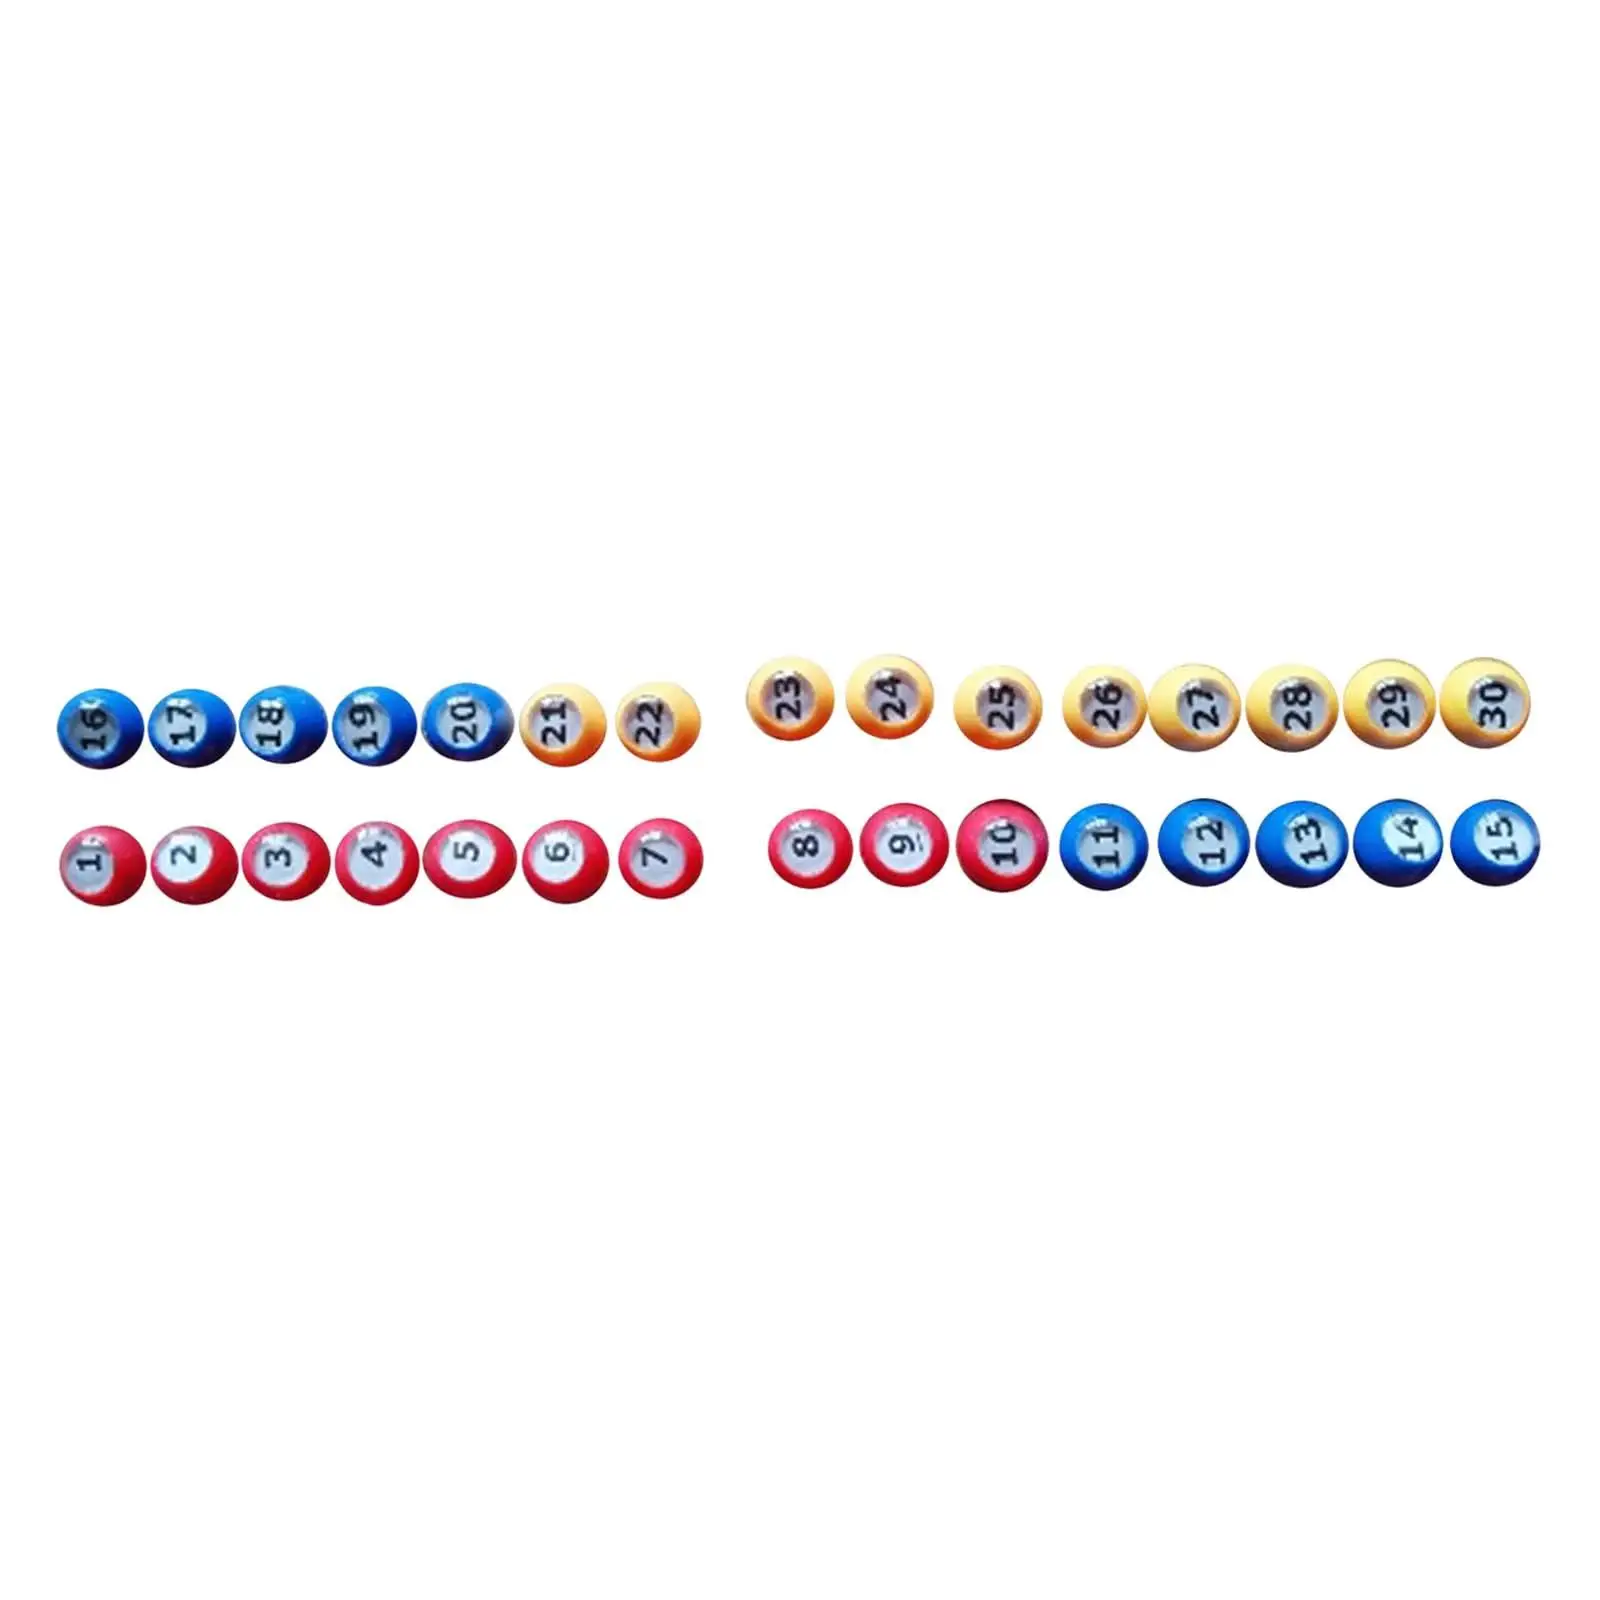 30Pcs Bingo Ball Fittings with Easy Read Window Durable Replacement Raffle Balls